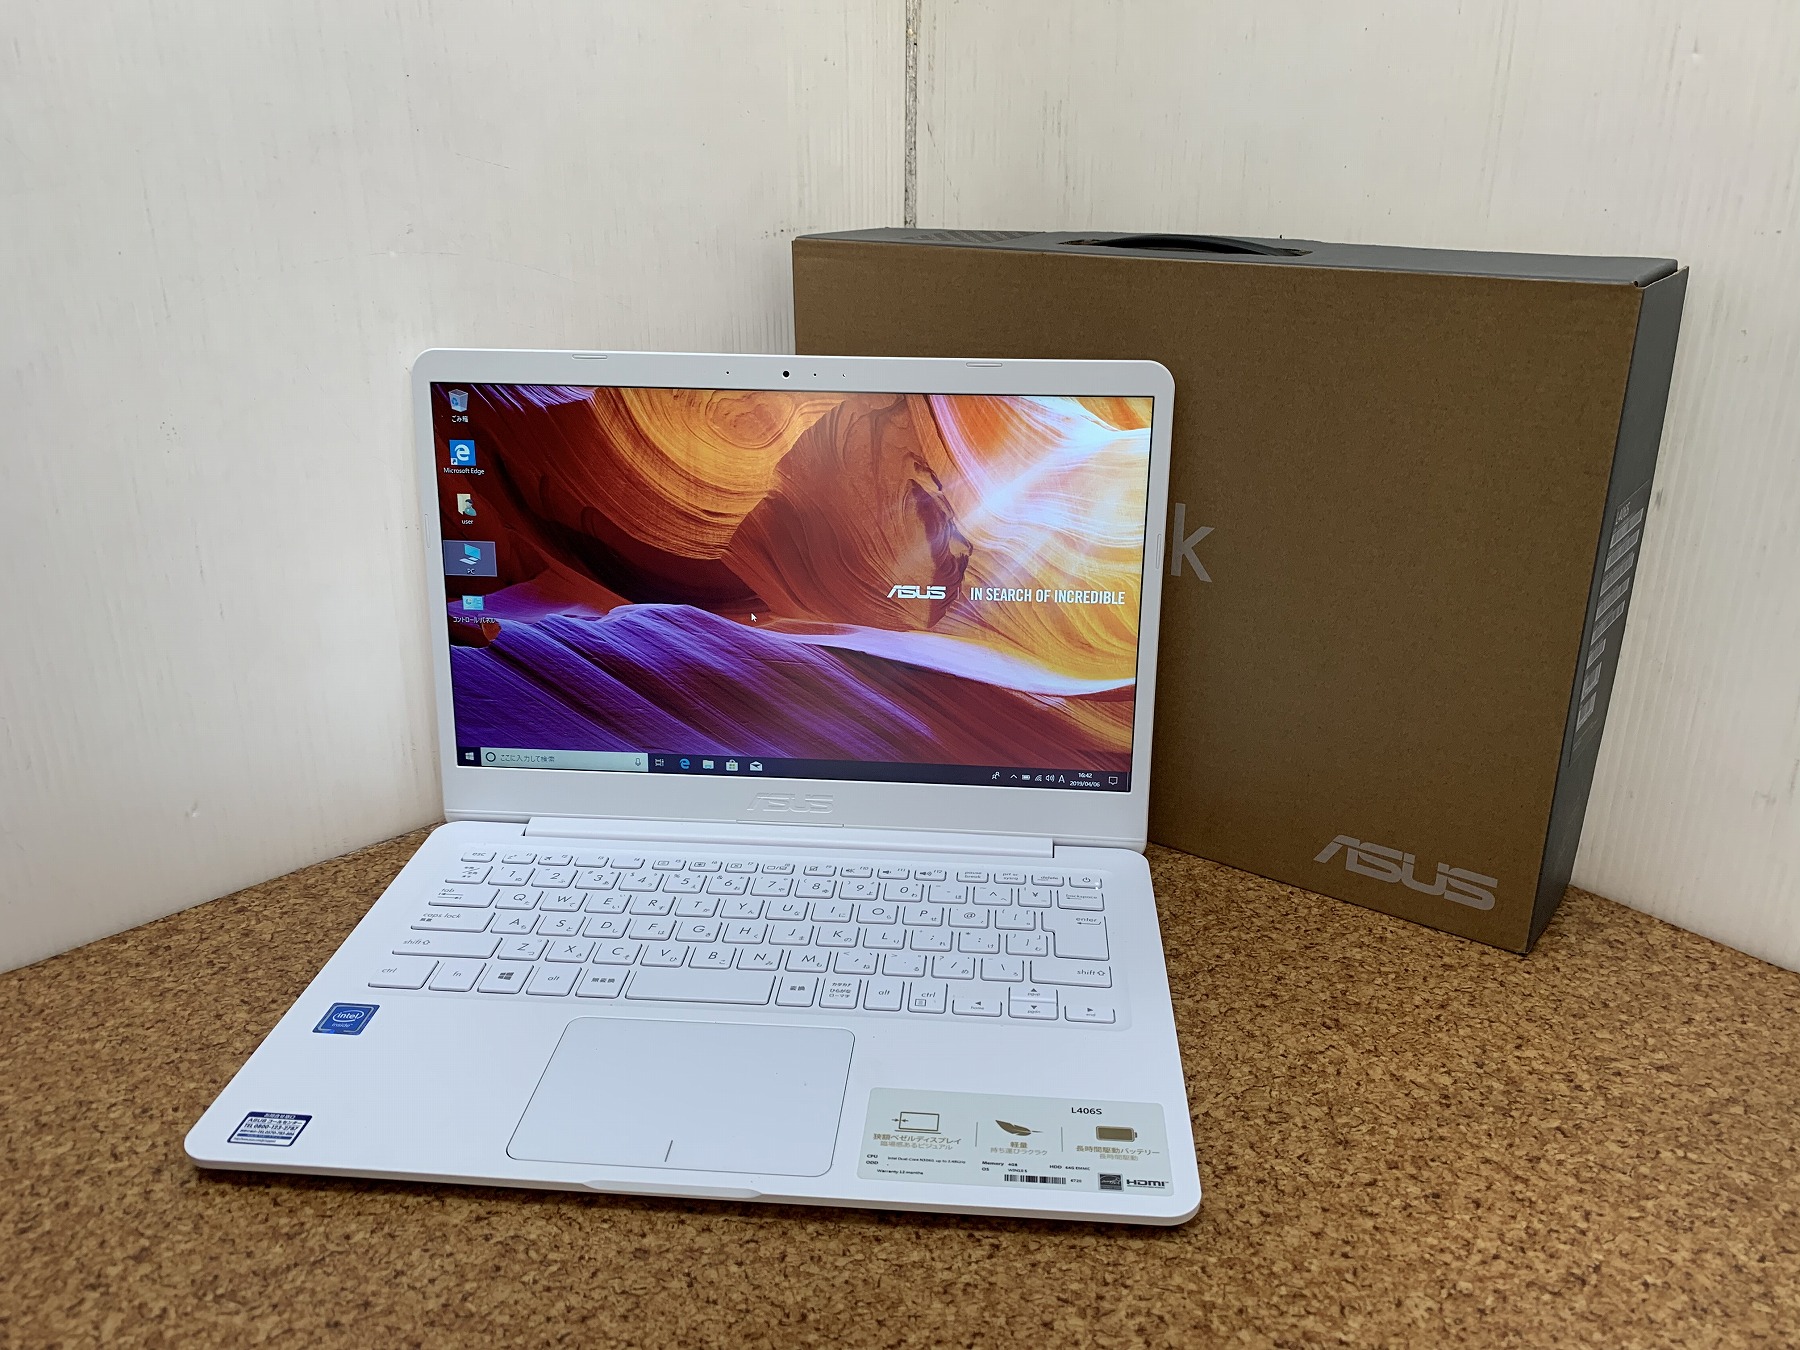 asus notebook L406s